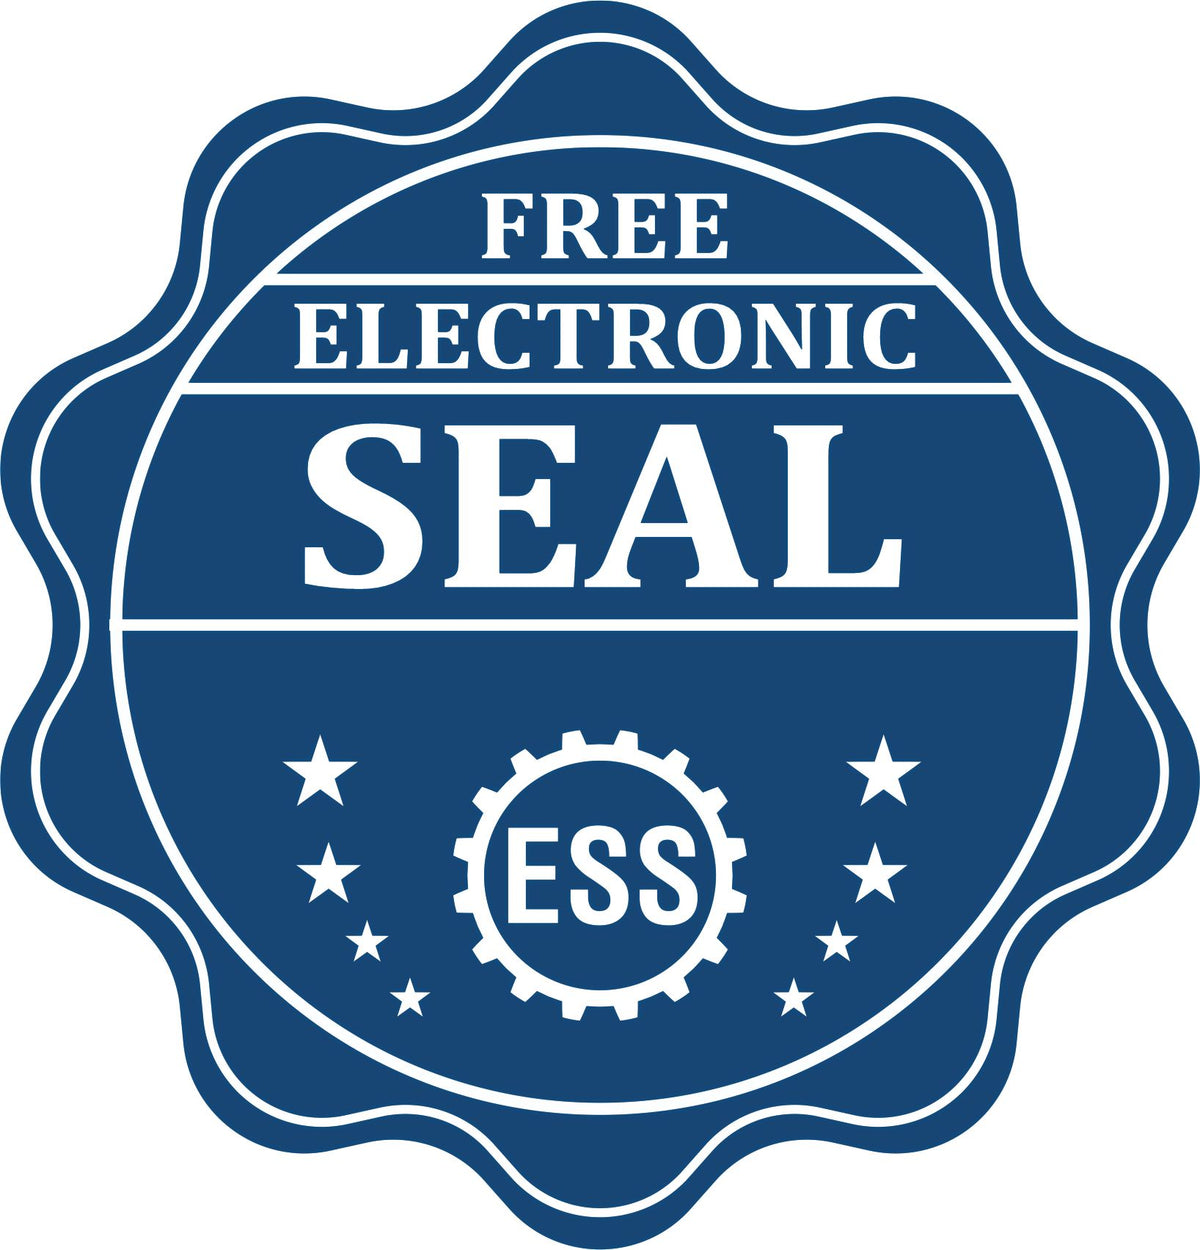 A badge showing a free electronic seal for the Handheld Virginia Architect Seal Embosser with stars and the ESS gear on the emblem.